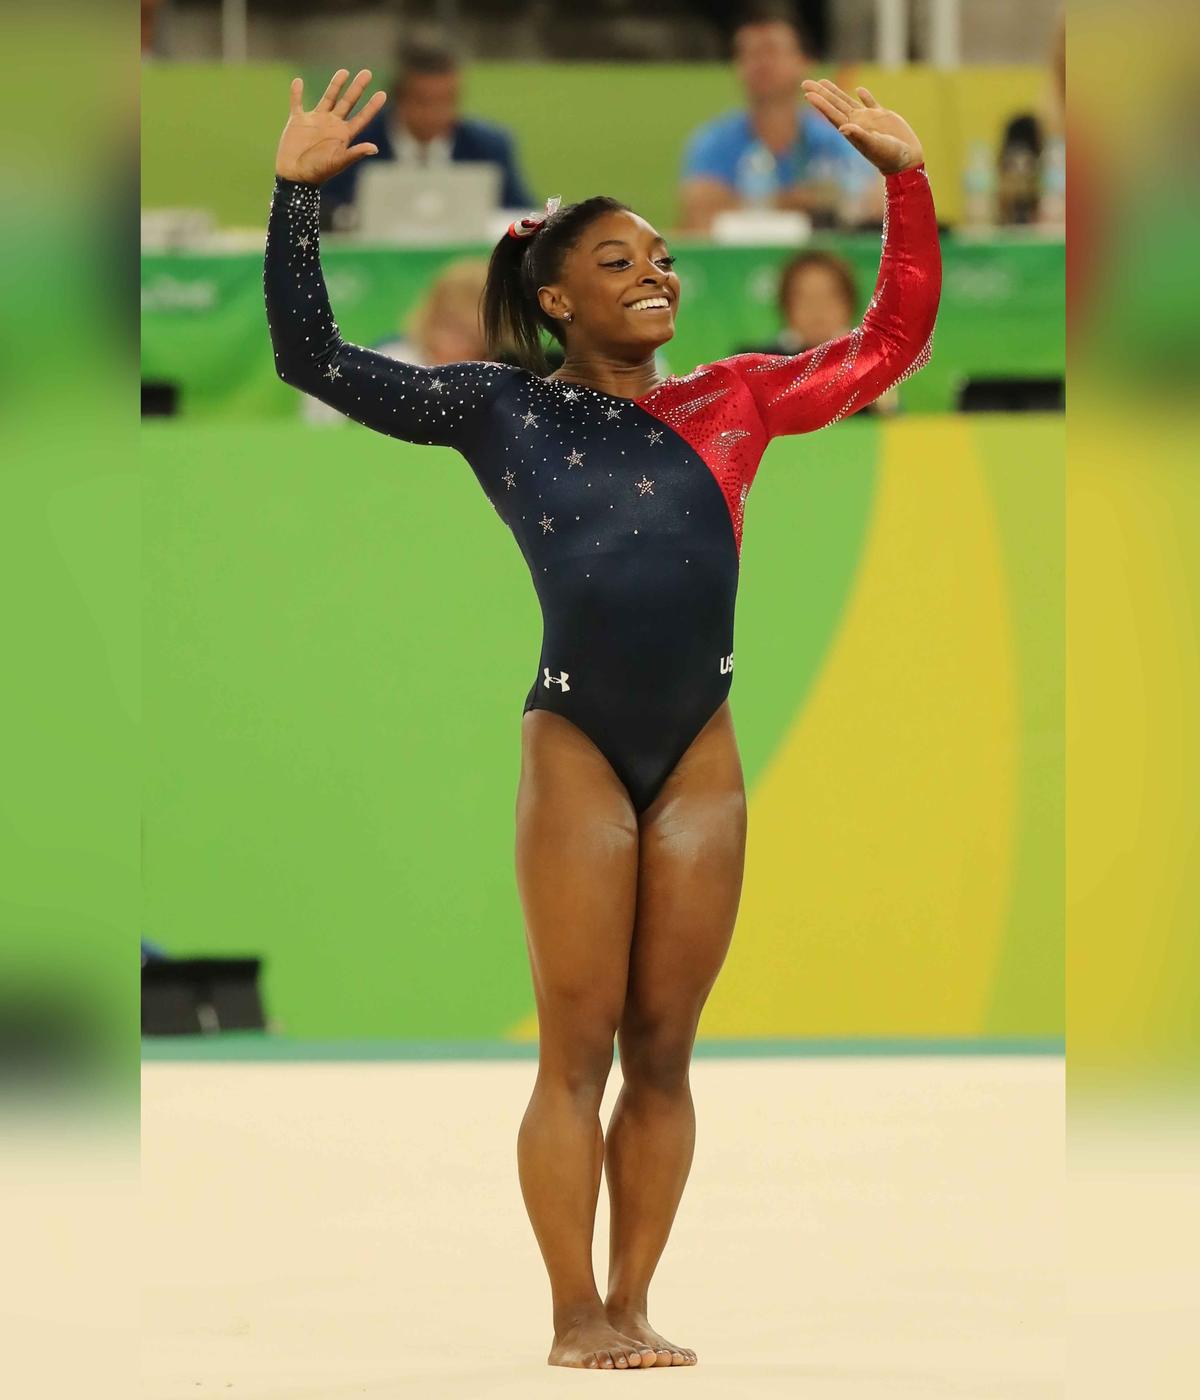 Olympic champion Simone Biles of United States competes on the floor exercise during women's all-around gymnastics qualification at Rio 2016 Olympic Games. (©Shutterstock | <a href="https://www.shutterstock.com/image-photo/rio-de-janeiro-brazil-august-7-502516261">Leonard Zhukovsky</a>)